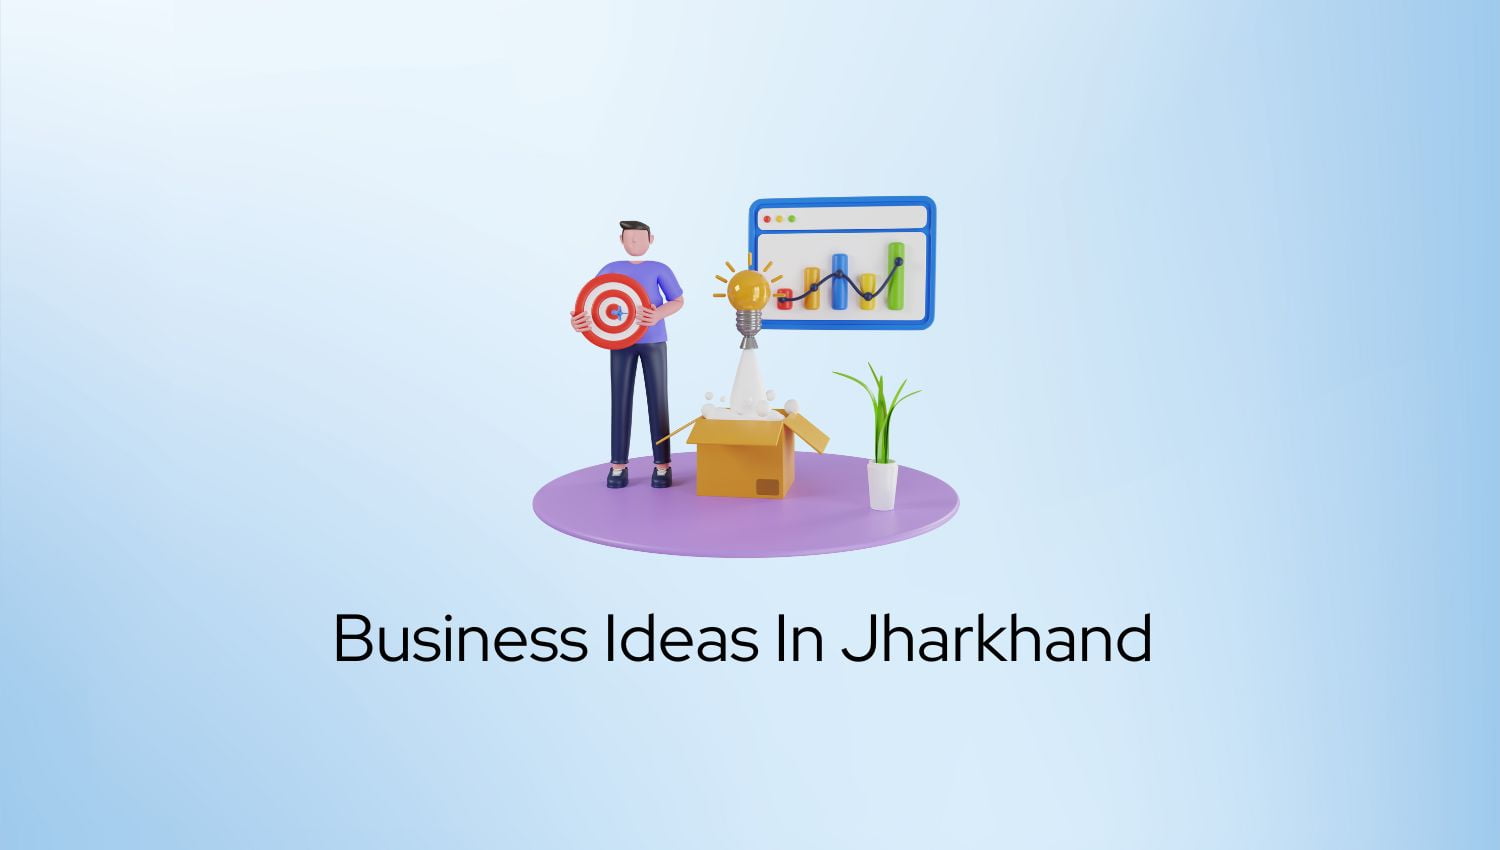 Discover Business Ideas In Jharkhand The Advantages of Starting a Business in Jharkhand In India